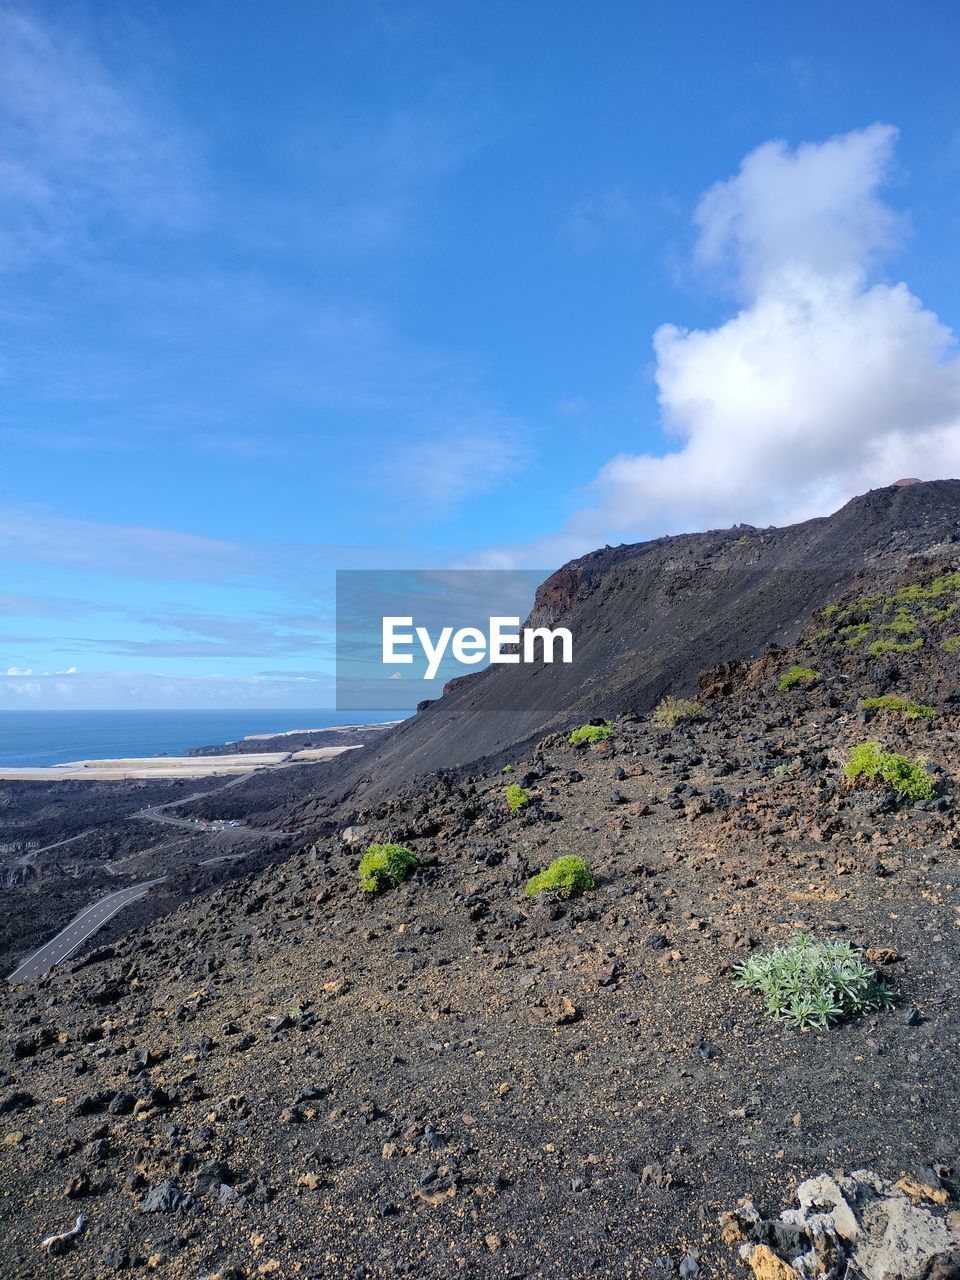 sky, environment, landscape, cloud, mountain, volcano, scenics - nature, nature, land, beauty in nature, volcanic landscape, geology, sea, ridge, non-urban scene, wilderness, no people, rock, travel destinations, lava, day, soil, outdoors, travel, volcanic crater, blue, volcanic rock, coast, tranquility, water, adventure, tranquil scene, physical geography, tourism, plateau